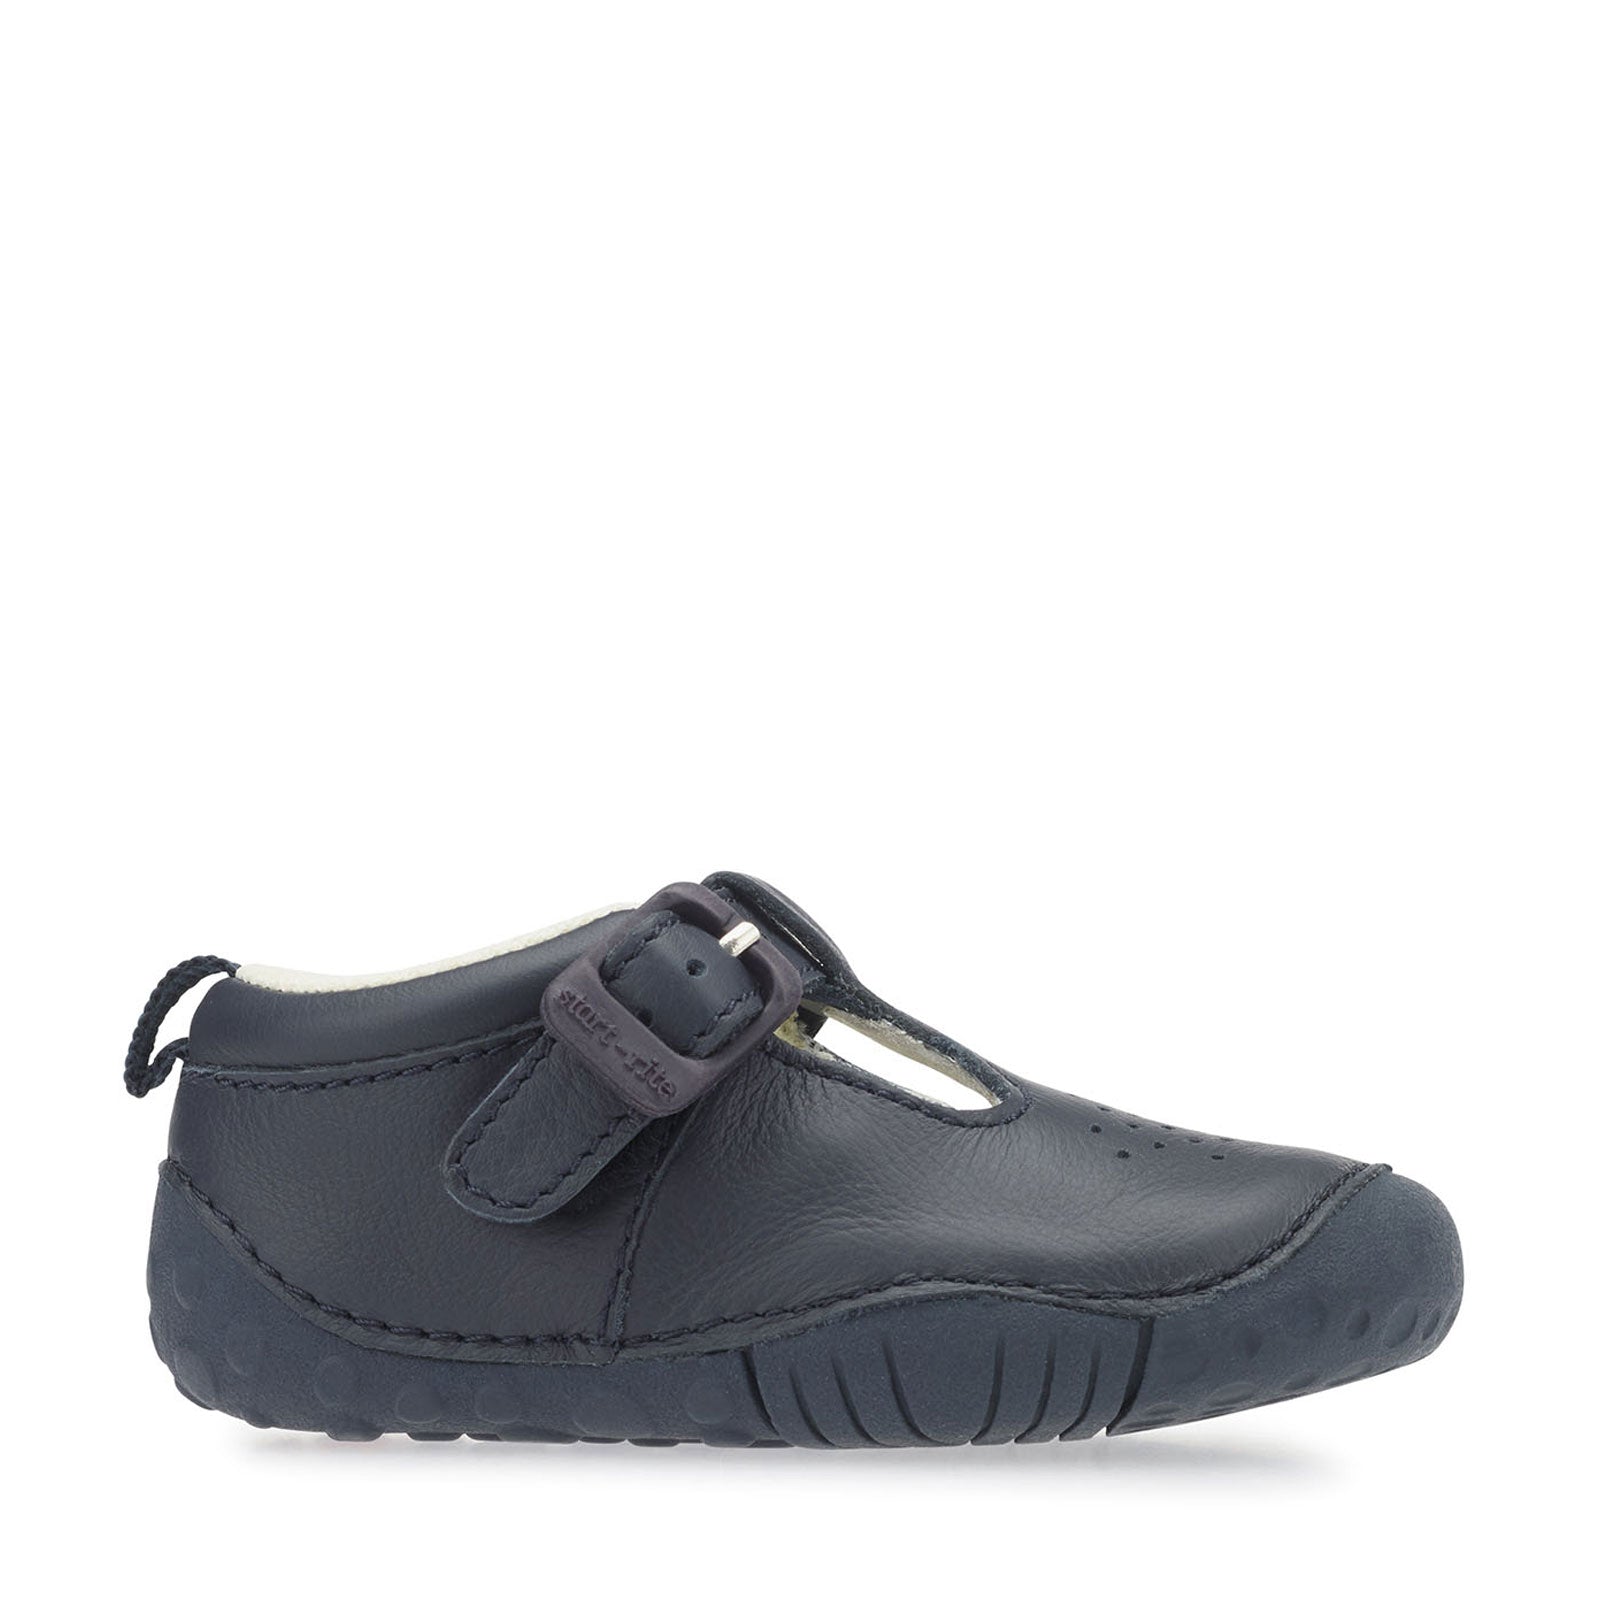 A boys T-Bar shoe by Start-Rite, style Baby Jack, in navy leather with punch out detail and buckle fastening. Right side view.